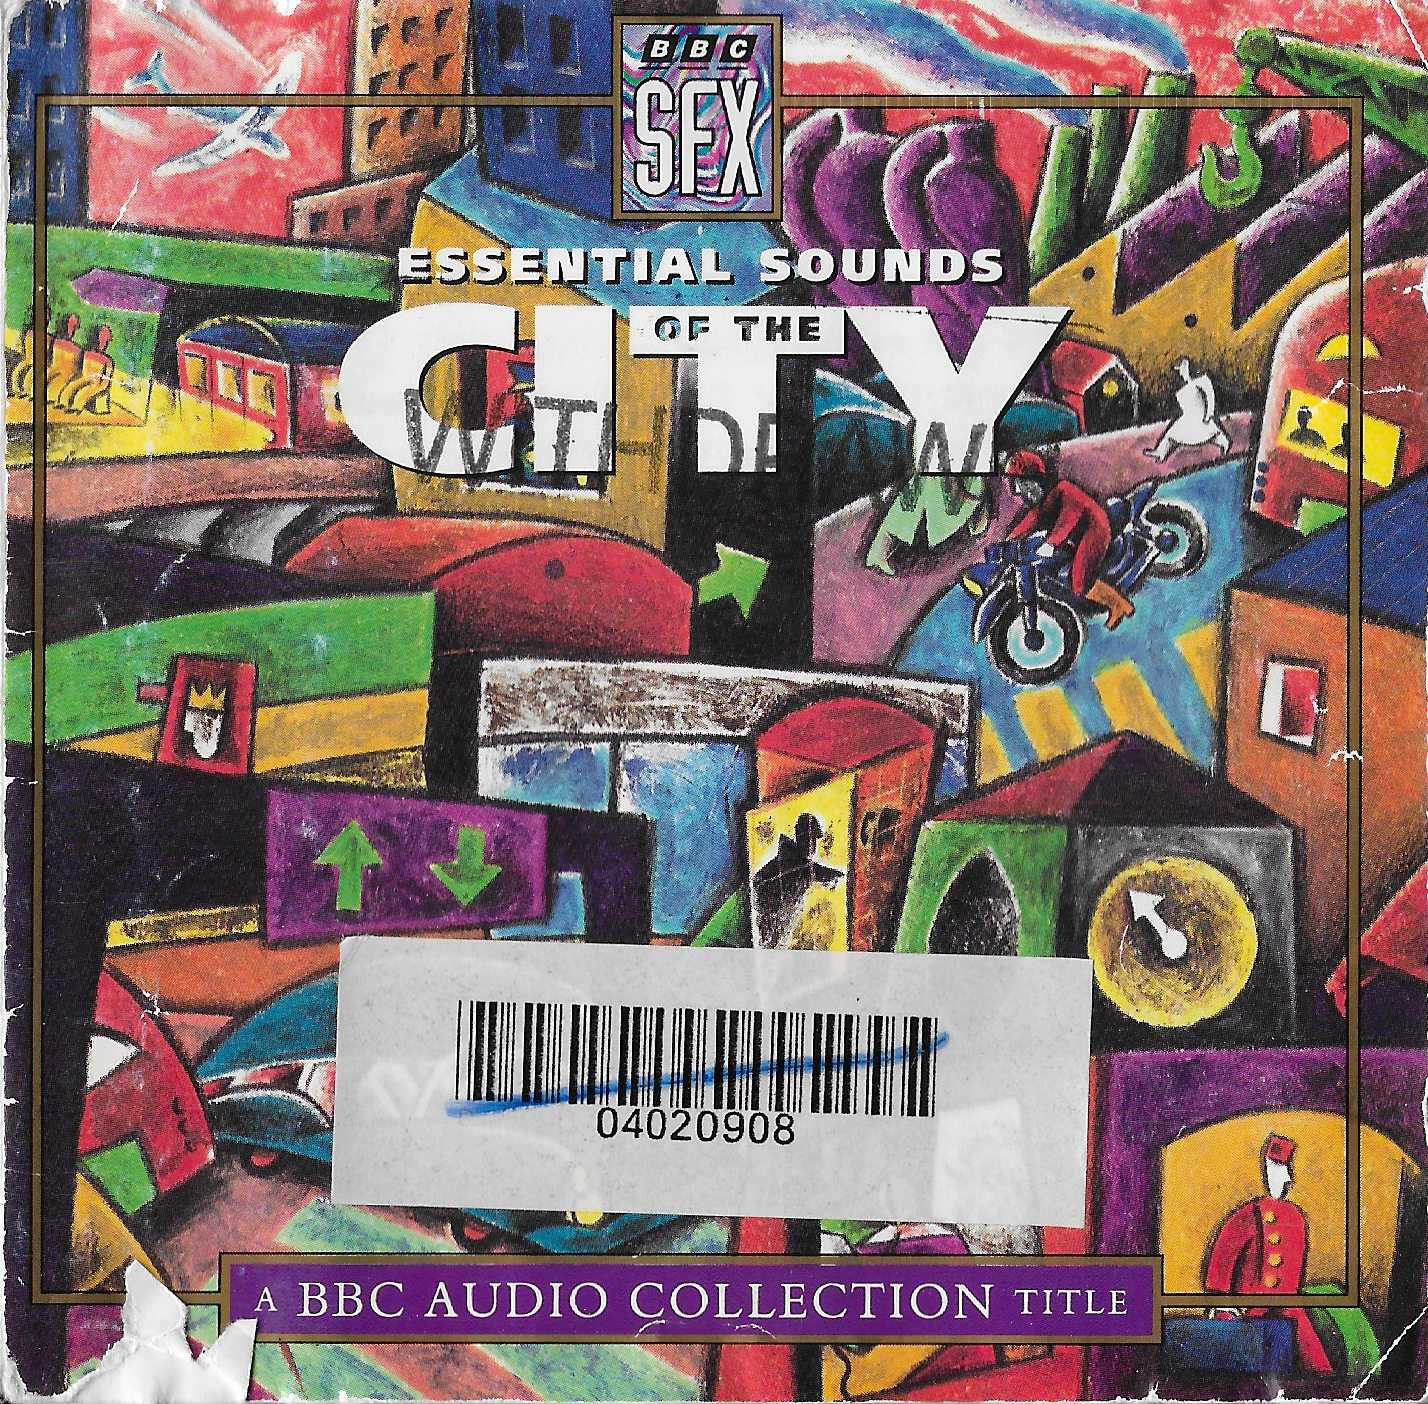 Picture of Essential sounds of the city by artist Various from the BBC cds - Records and Tapes library